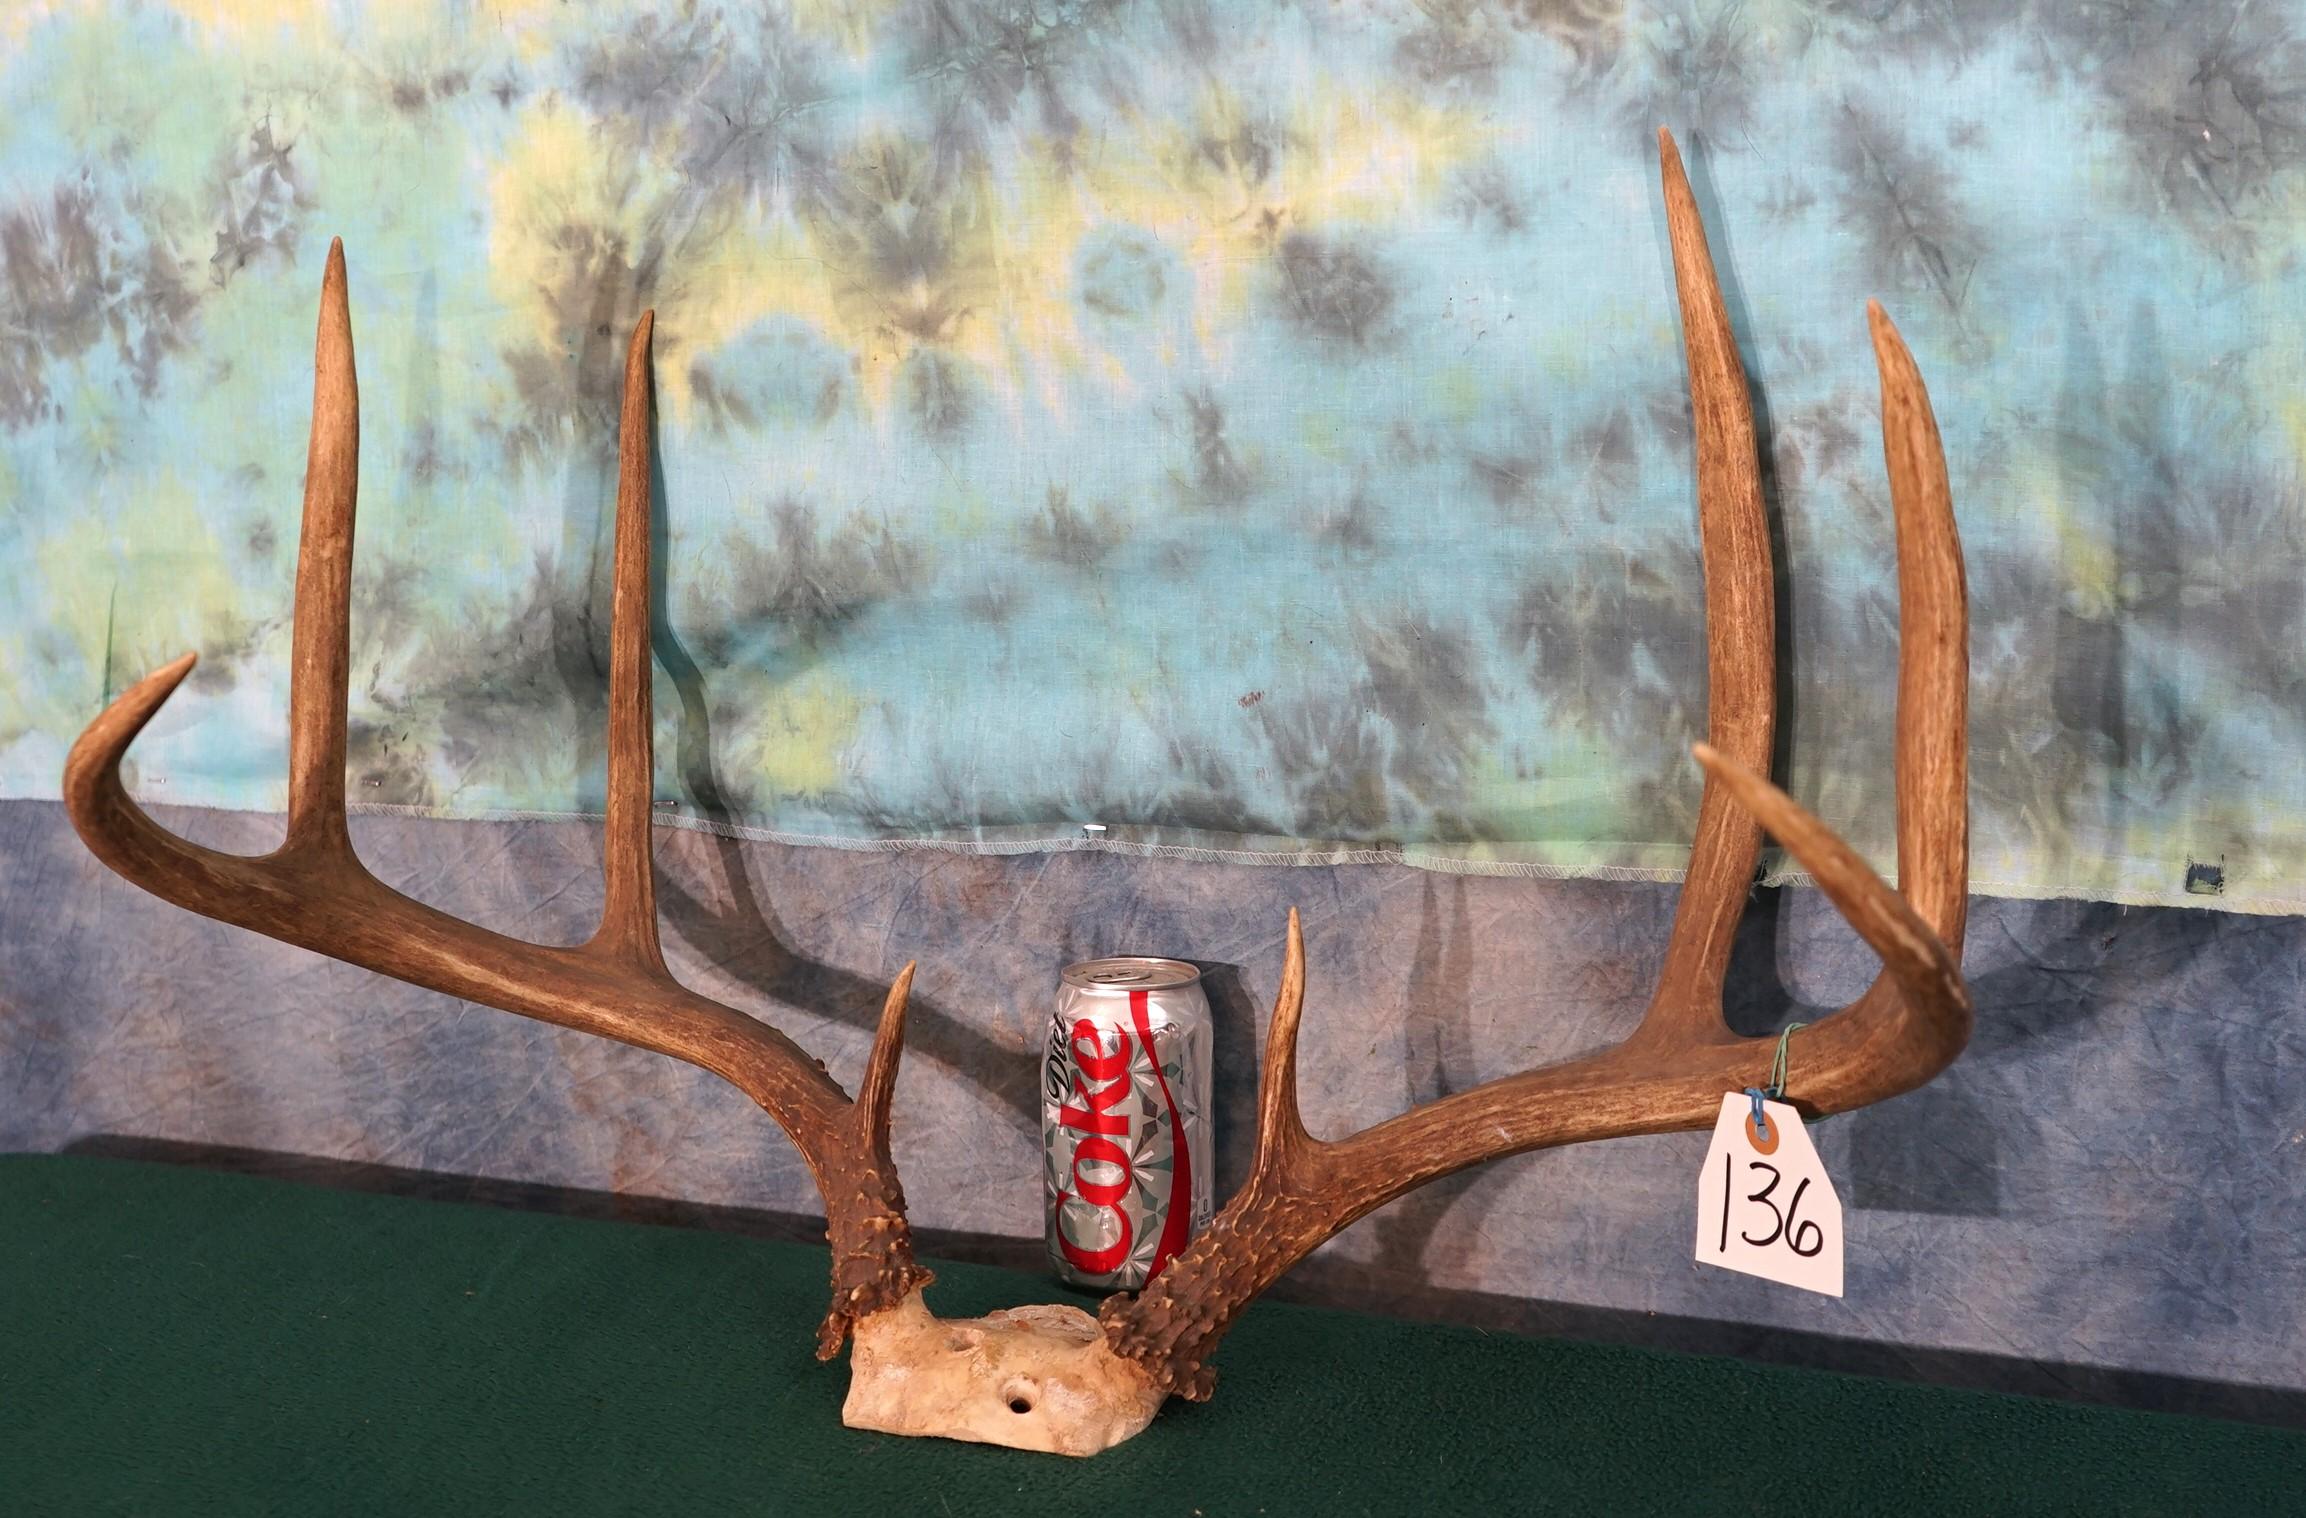 Big 8pt. South Texas Whitetail Deer Antlers Taxidermy